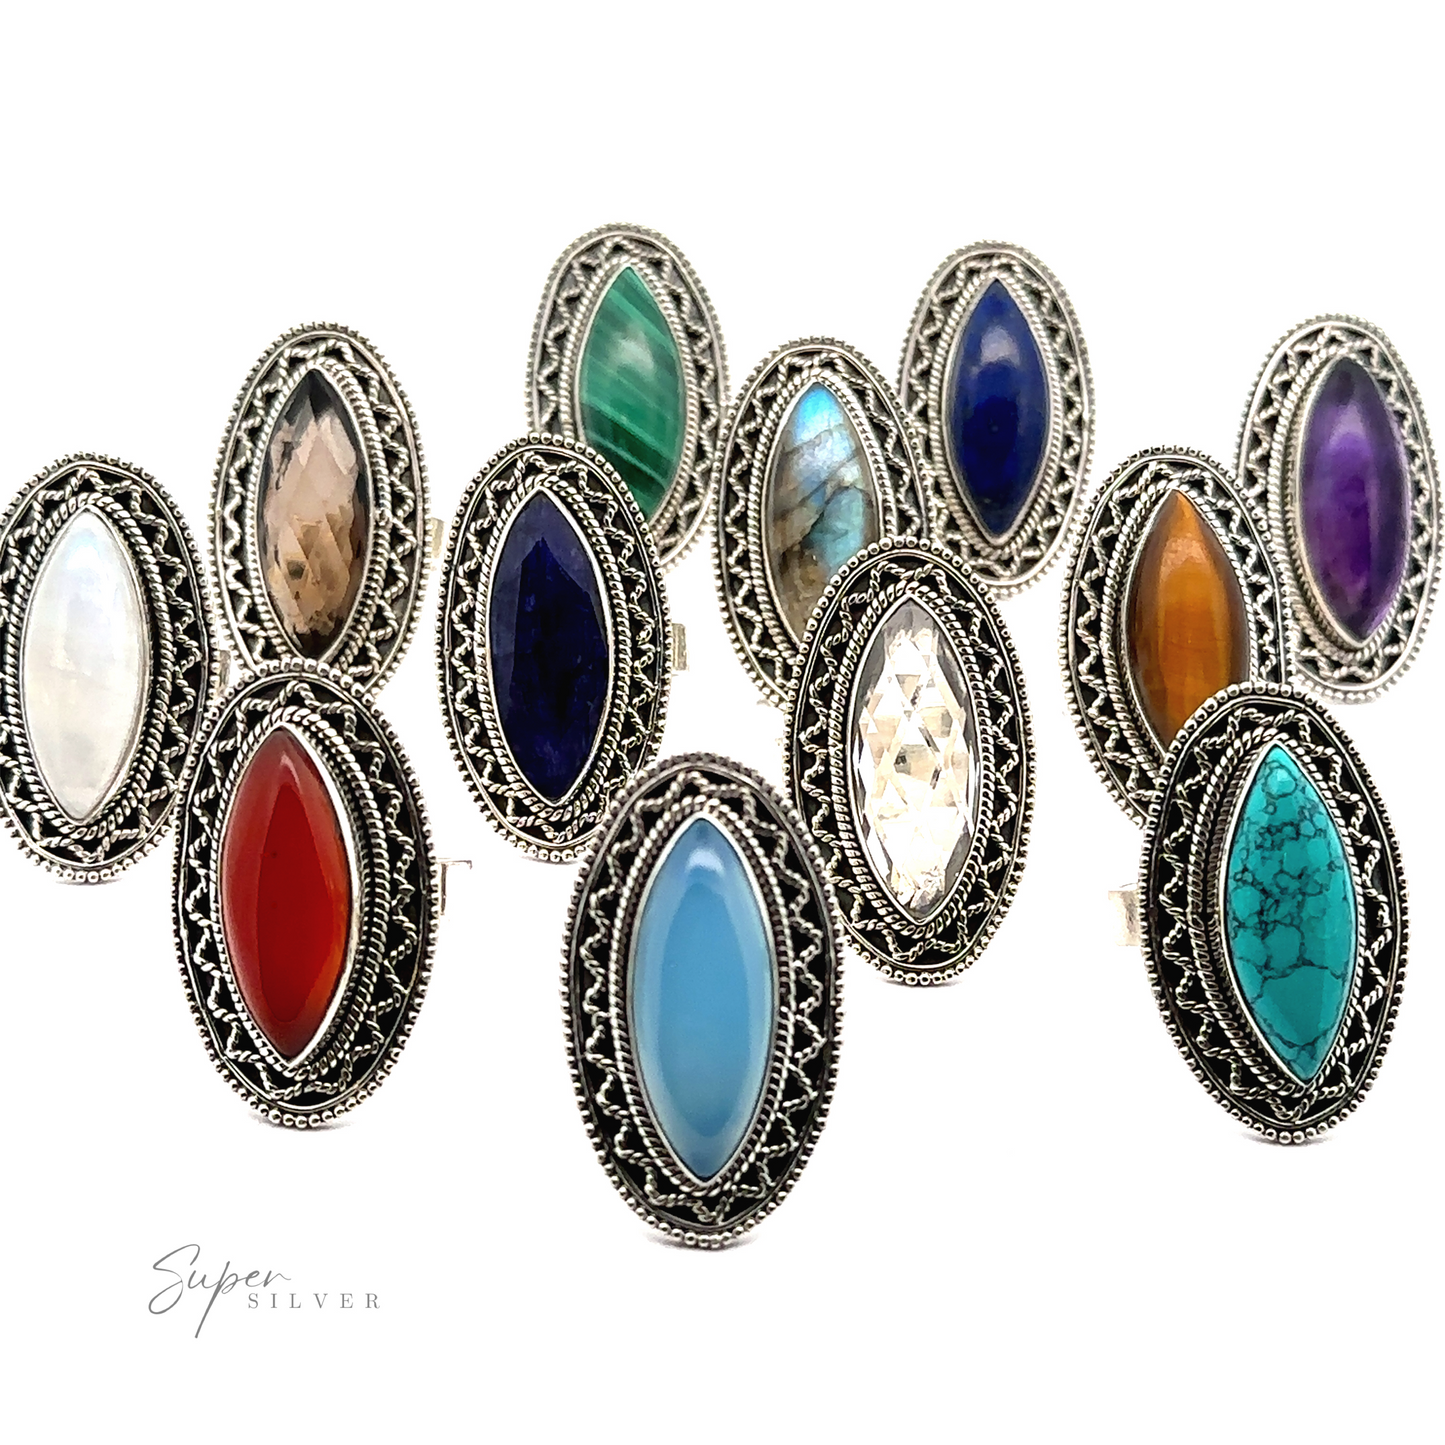 A collection of Marquise Shaped Gemstone Rings With Vintage Shield Border, each featuring an oval-shaped gemstone of varied colors and patterns with a Bohemian twist, is arranged in three rows against a white background.